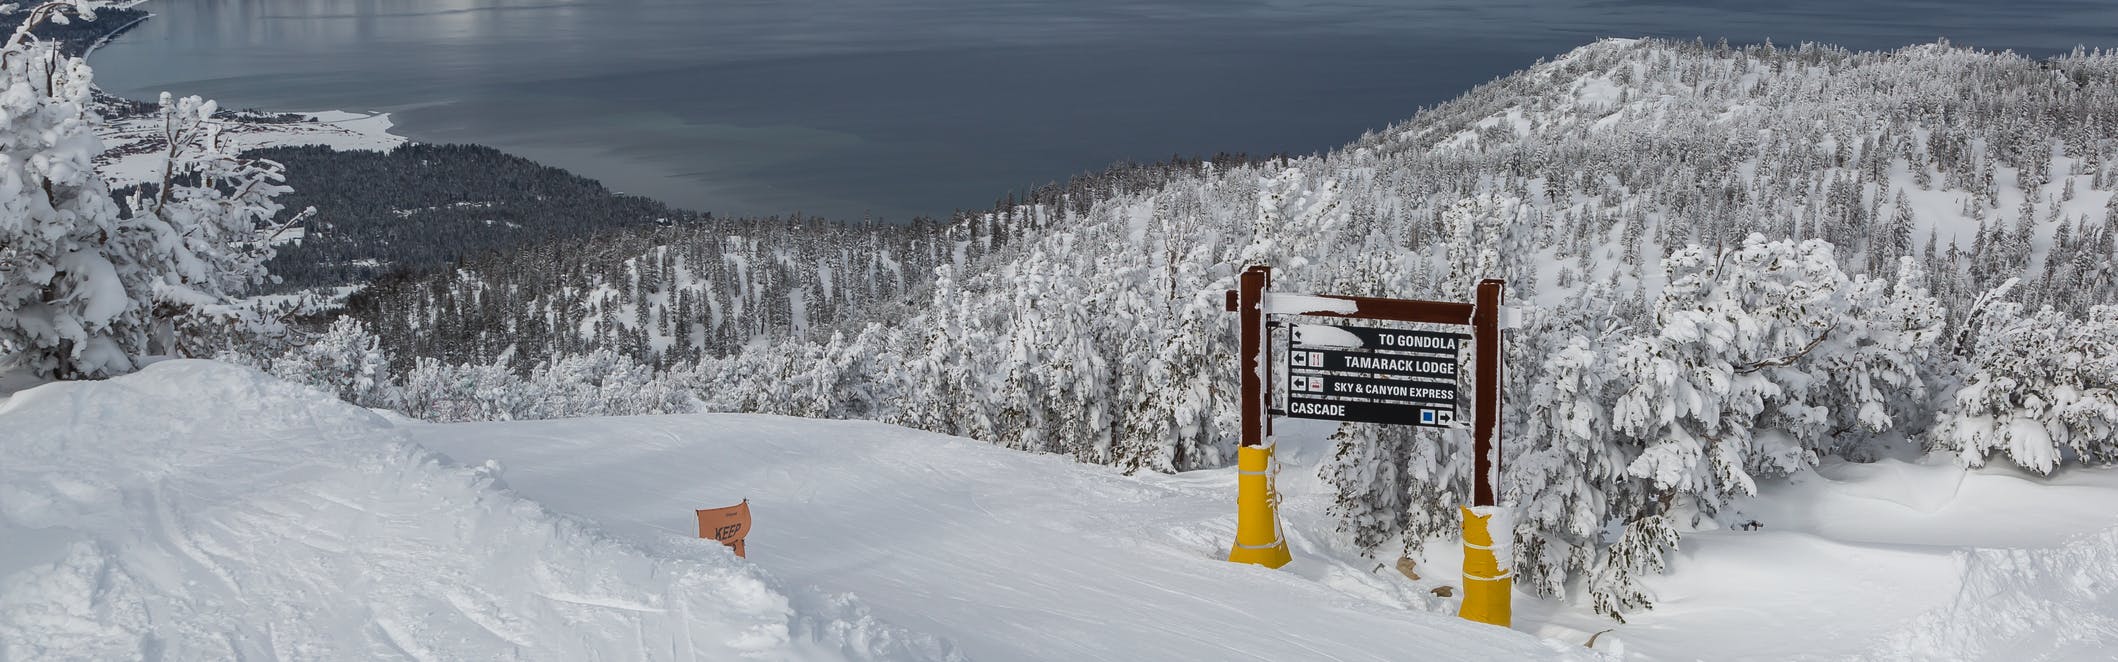 A sign listing ski runs sits on a snowy hill with trees and a lake in the background